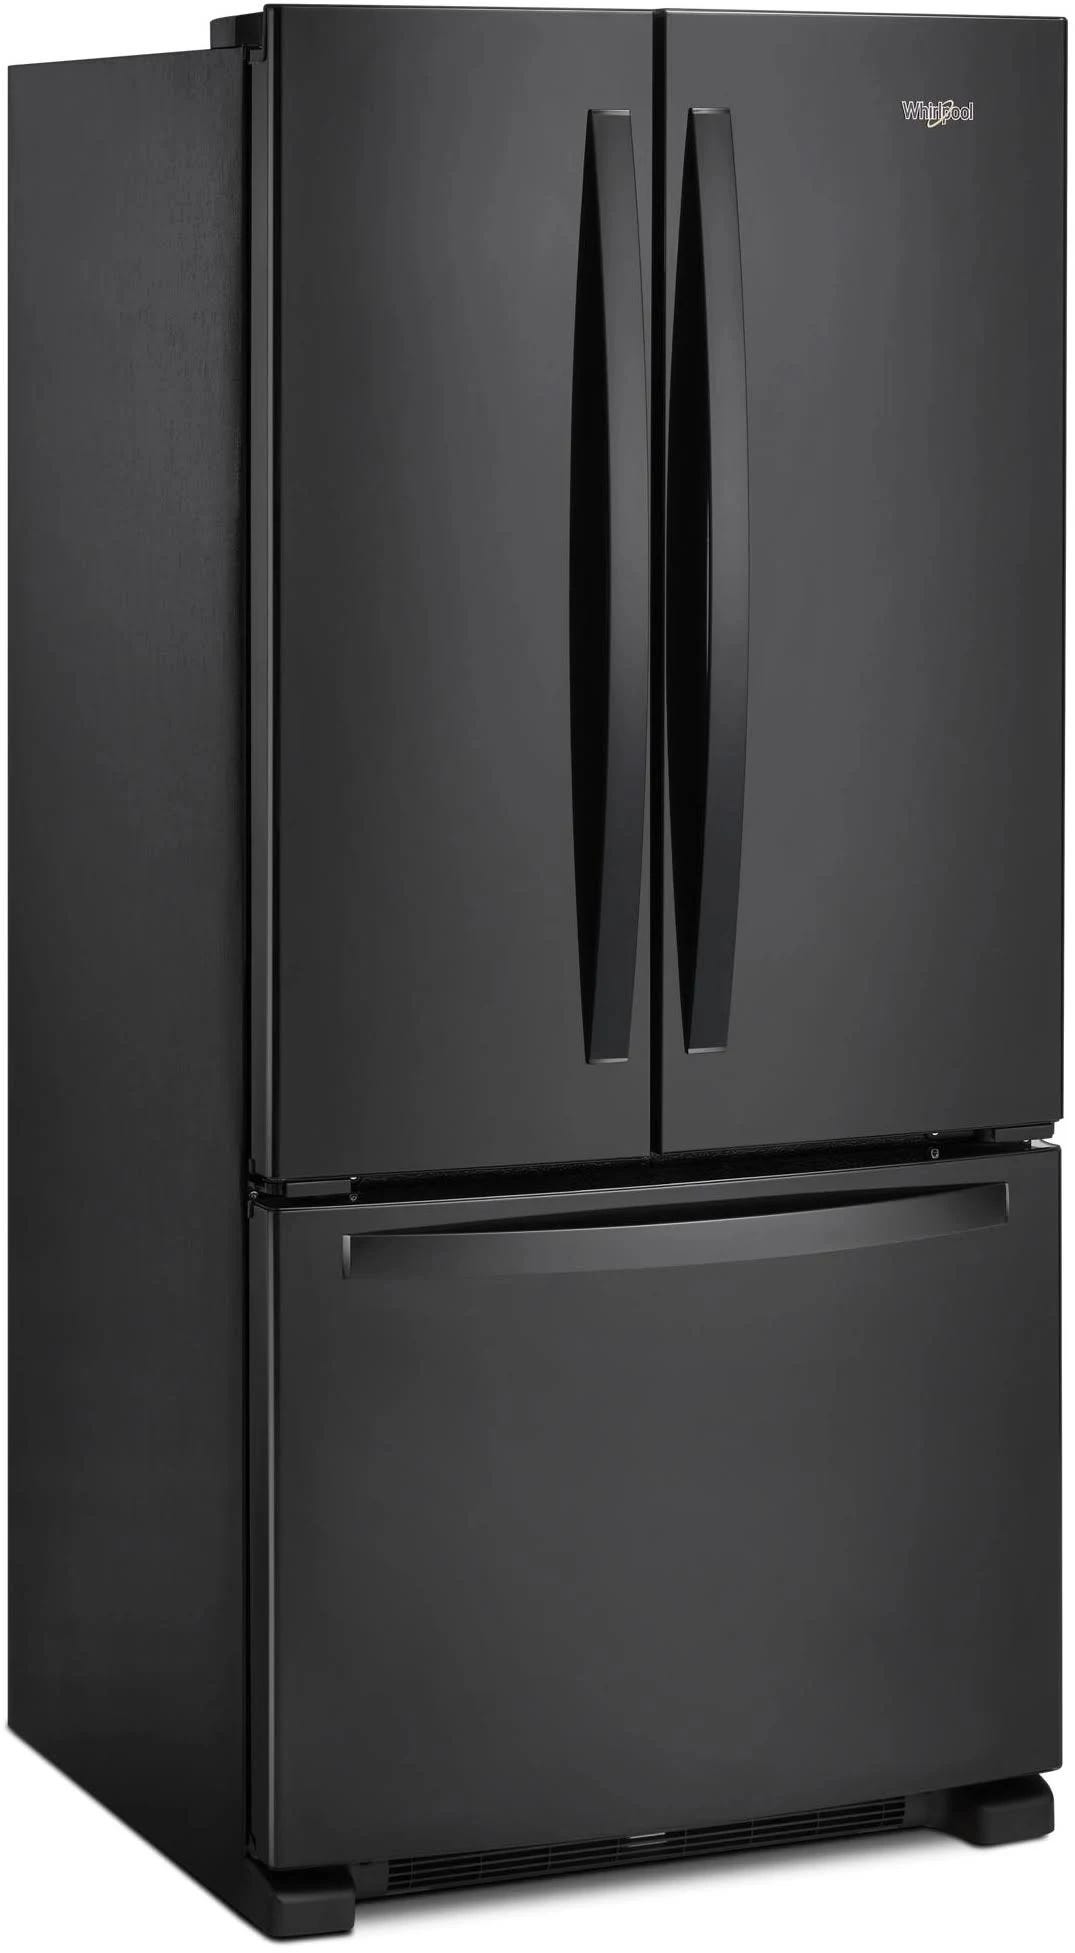 Whirlpool 33-inch French Door Refrigerator with 22 Cu. ft. Capacity | Image